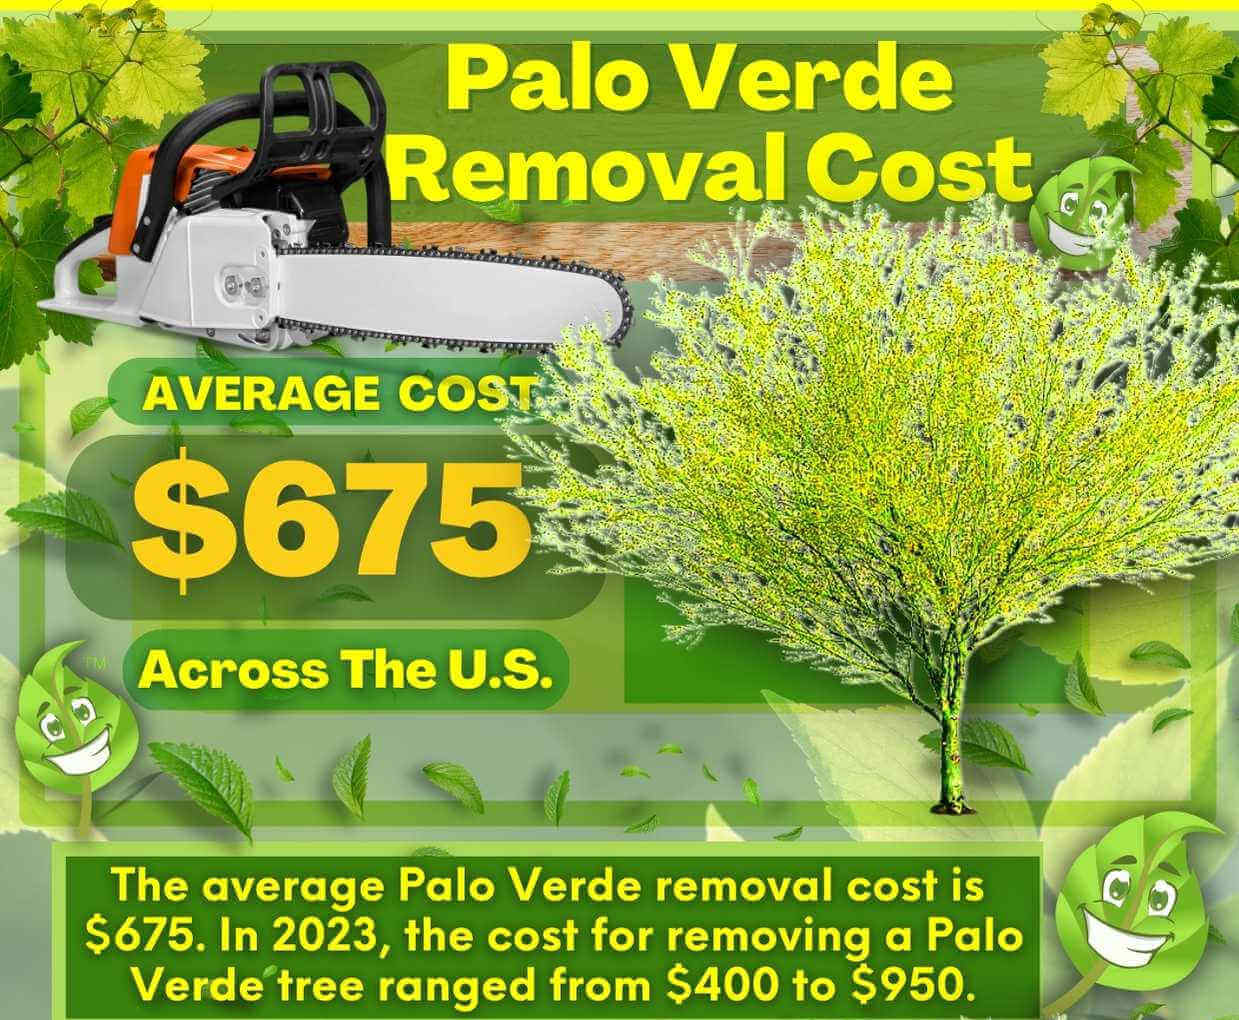 Palo Verde Removal Cost